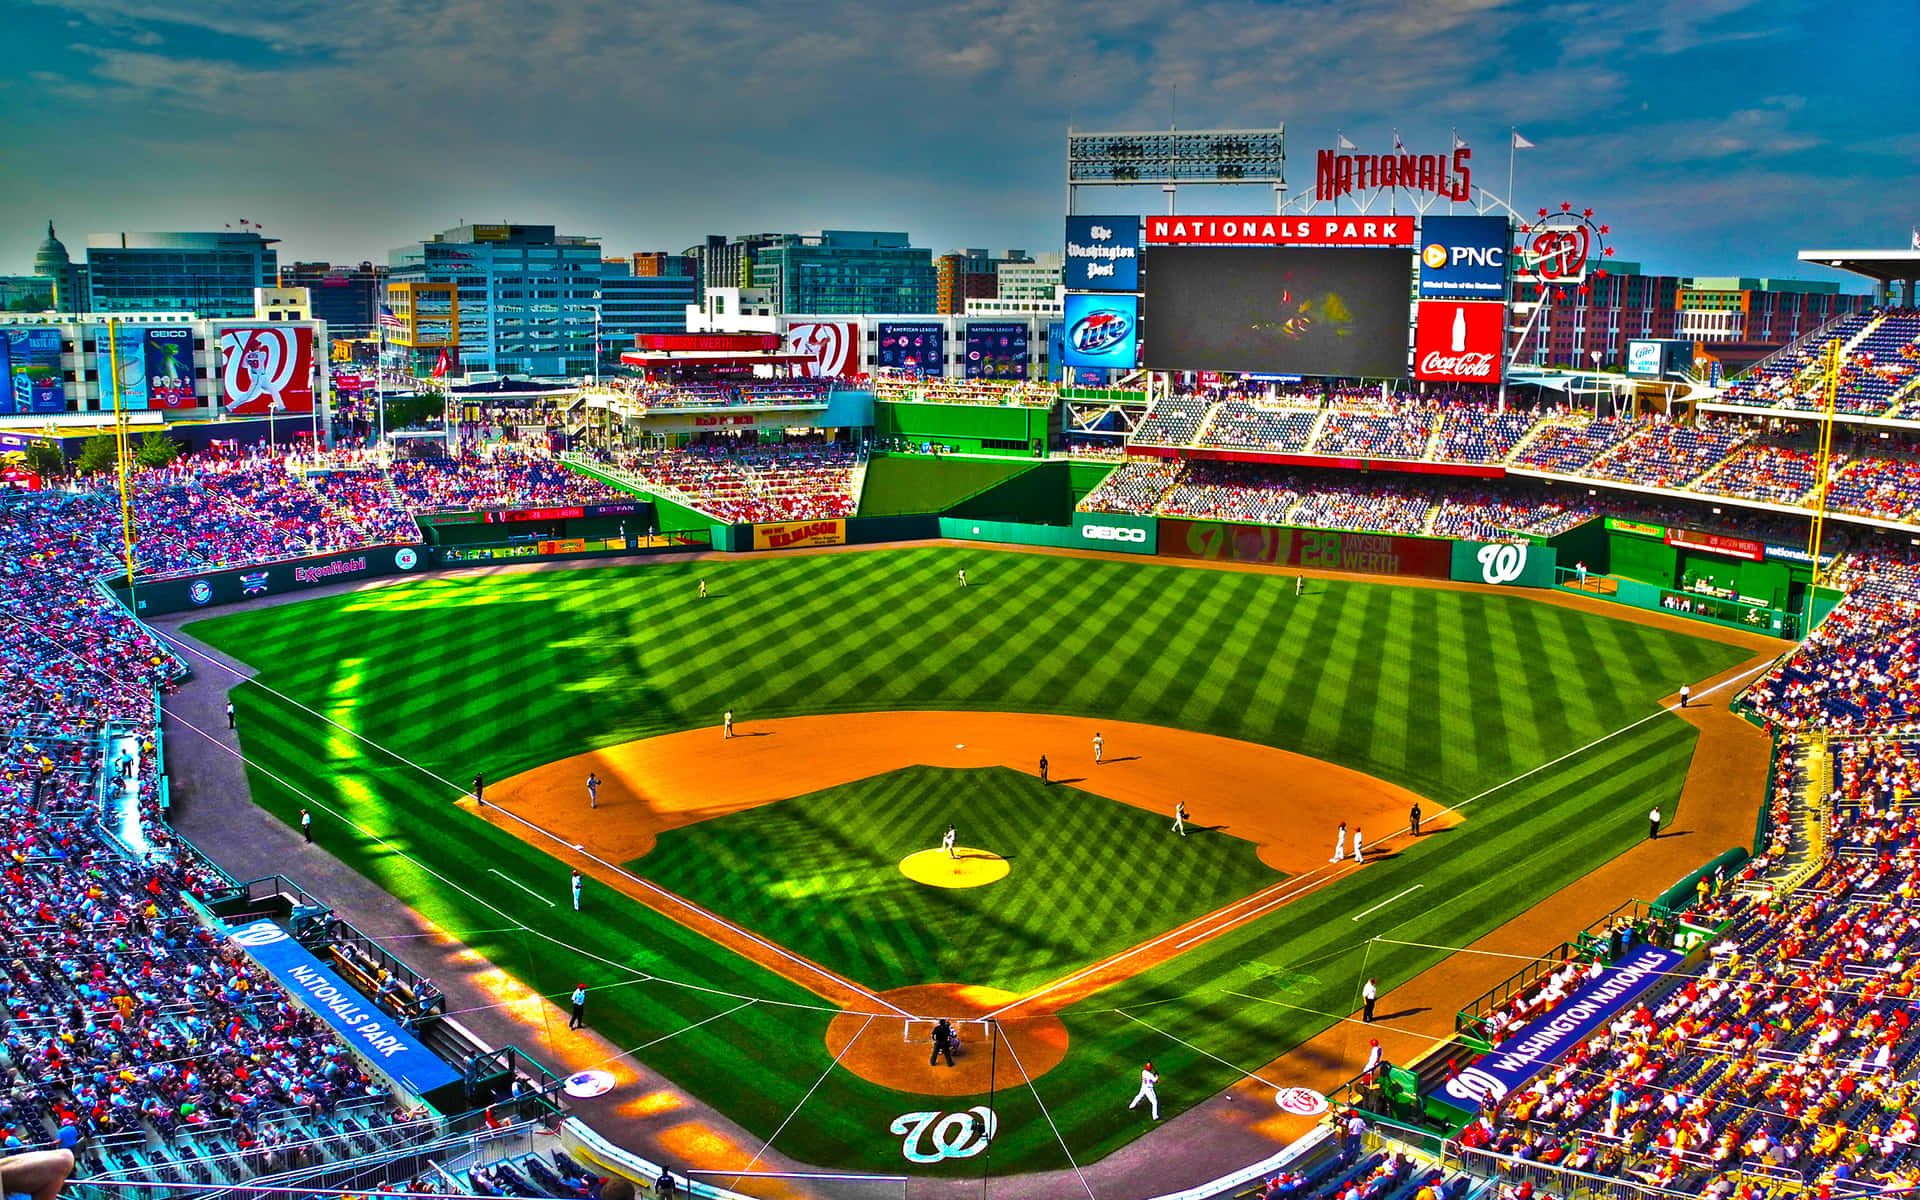 The Perfect Place for America's National Pastime